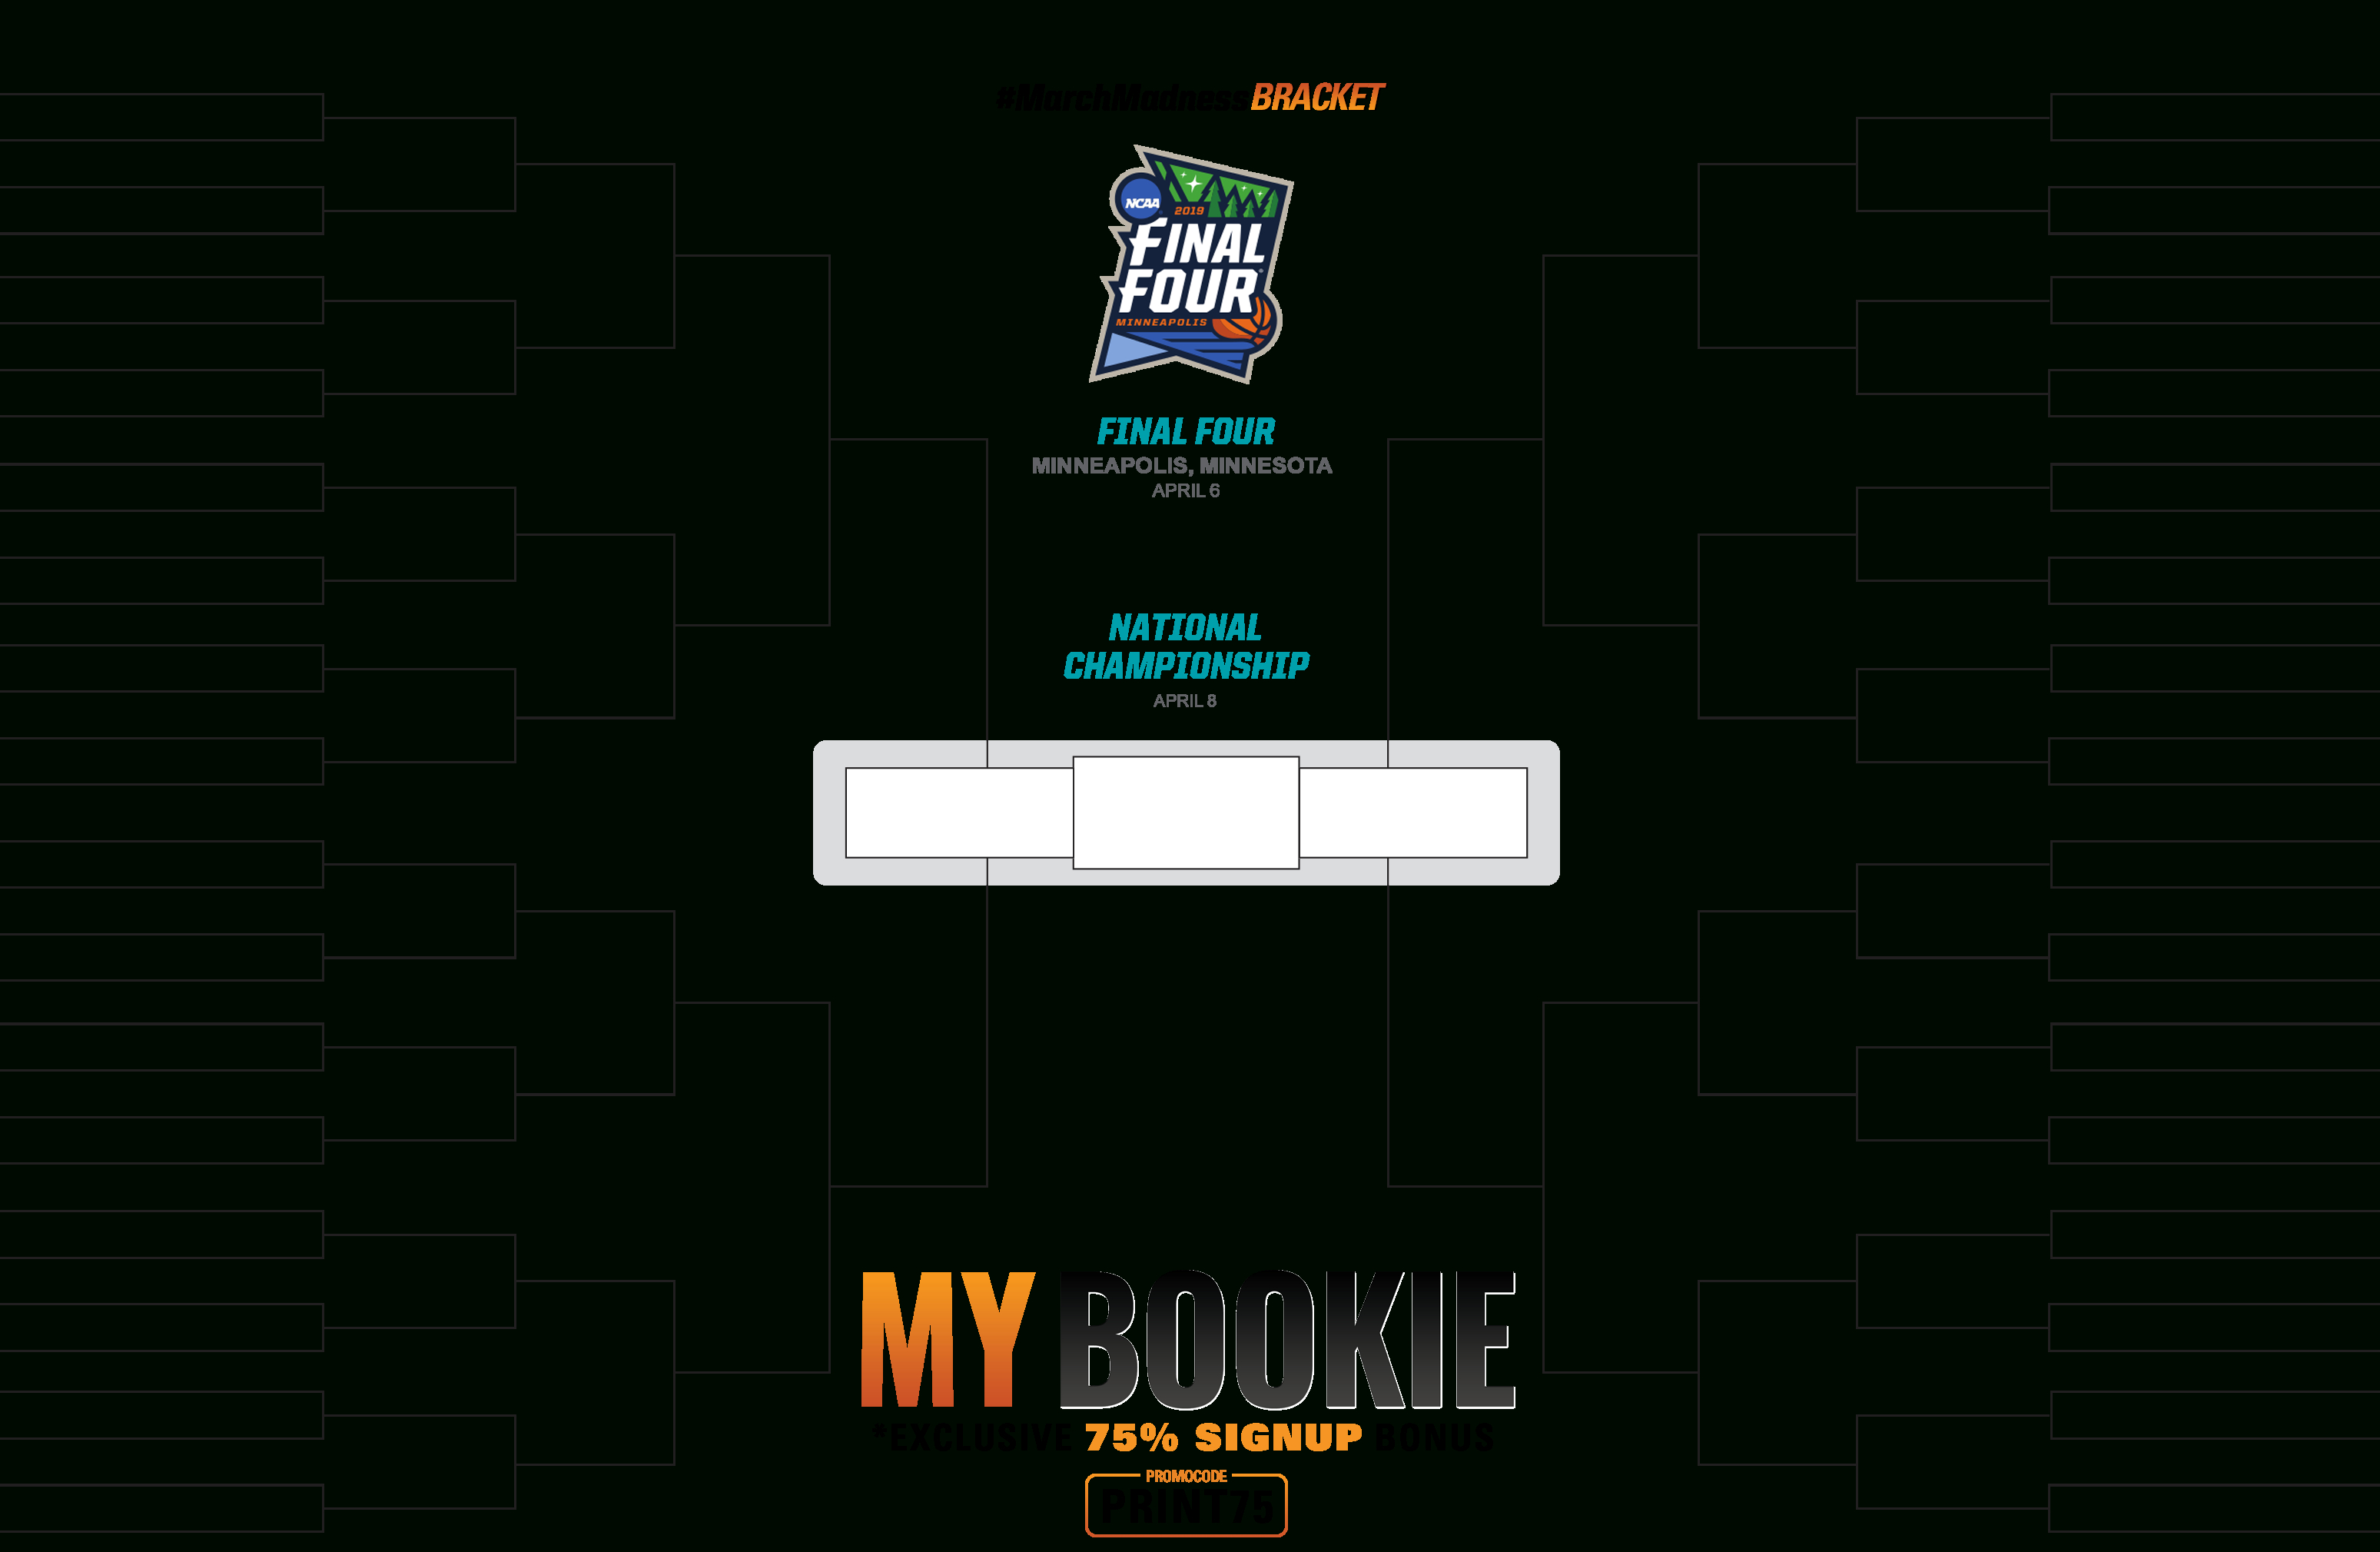 March Madness Bracket 2019 Printable, Fillable Tournament Brackets - Free Printable Brackets